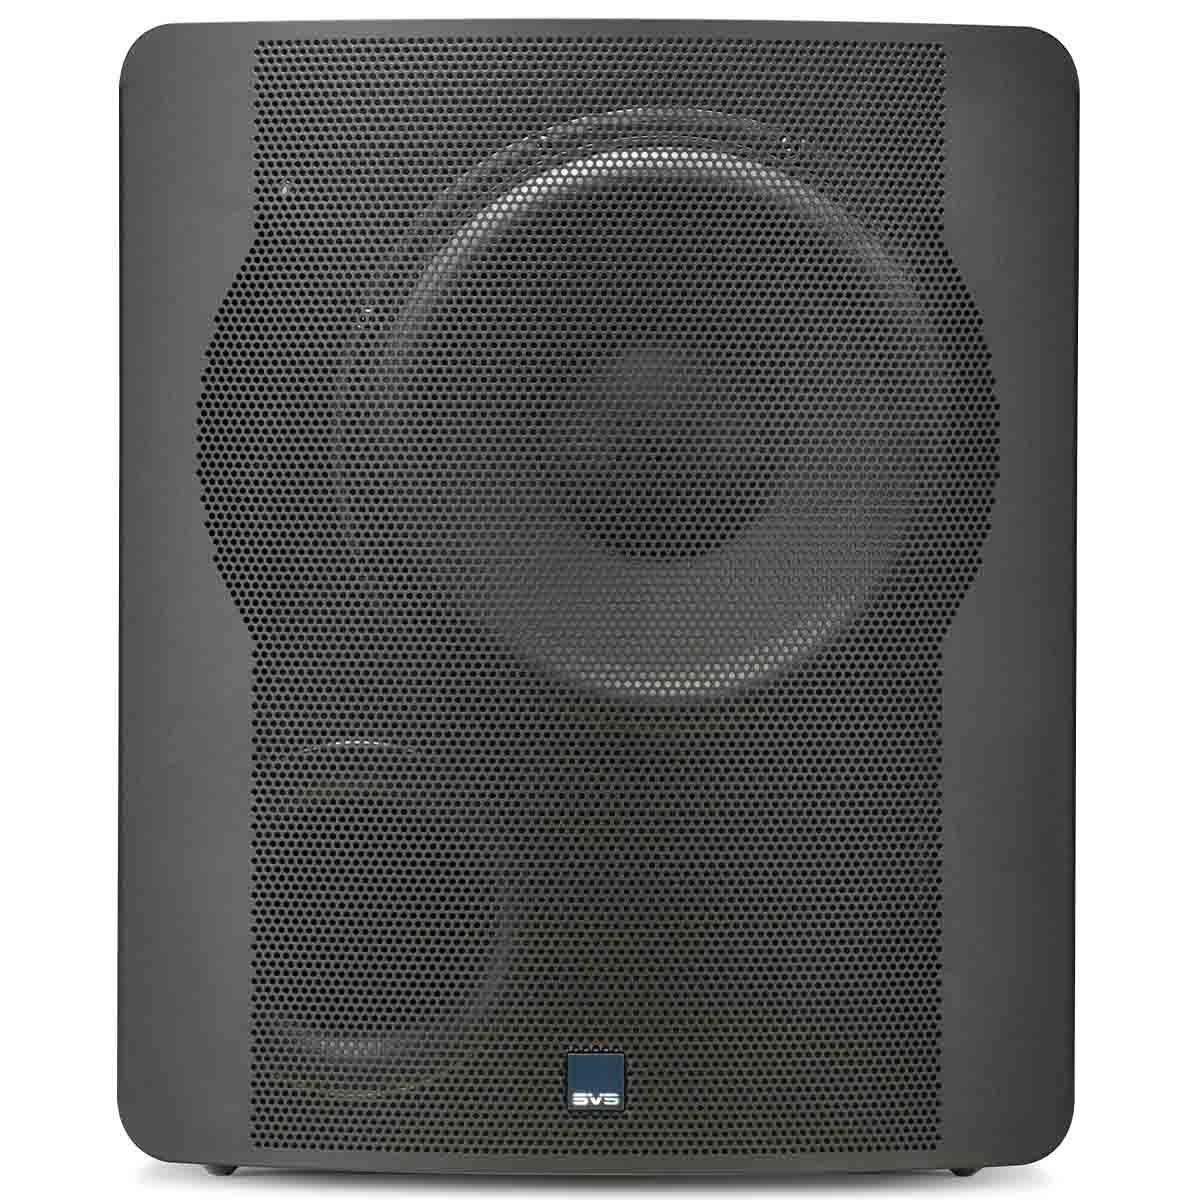 SVS PB-2000 12" Ported Subwoofer - Premium Black Ash - front view with grille